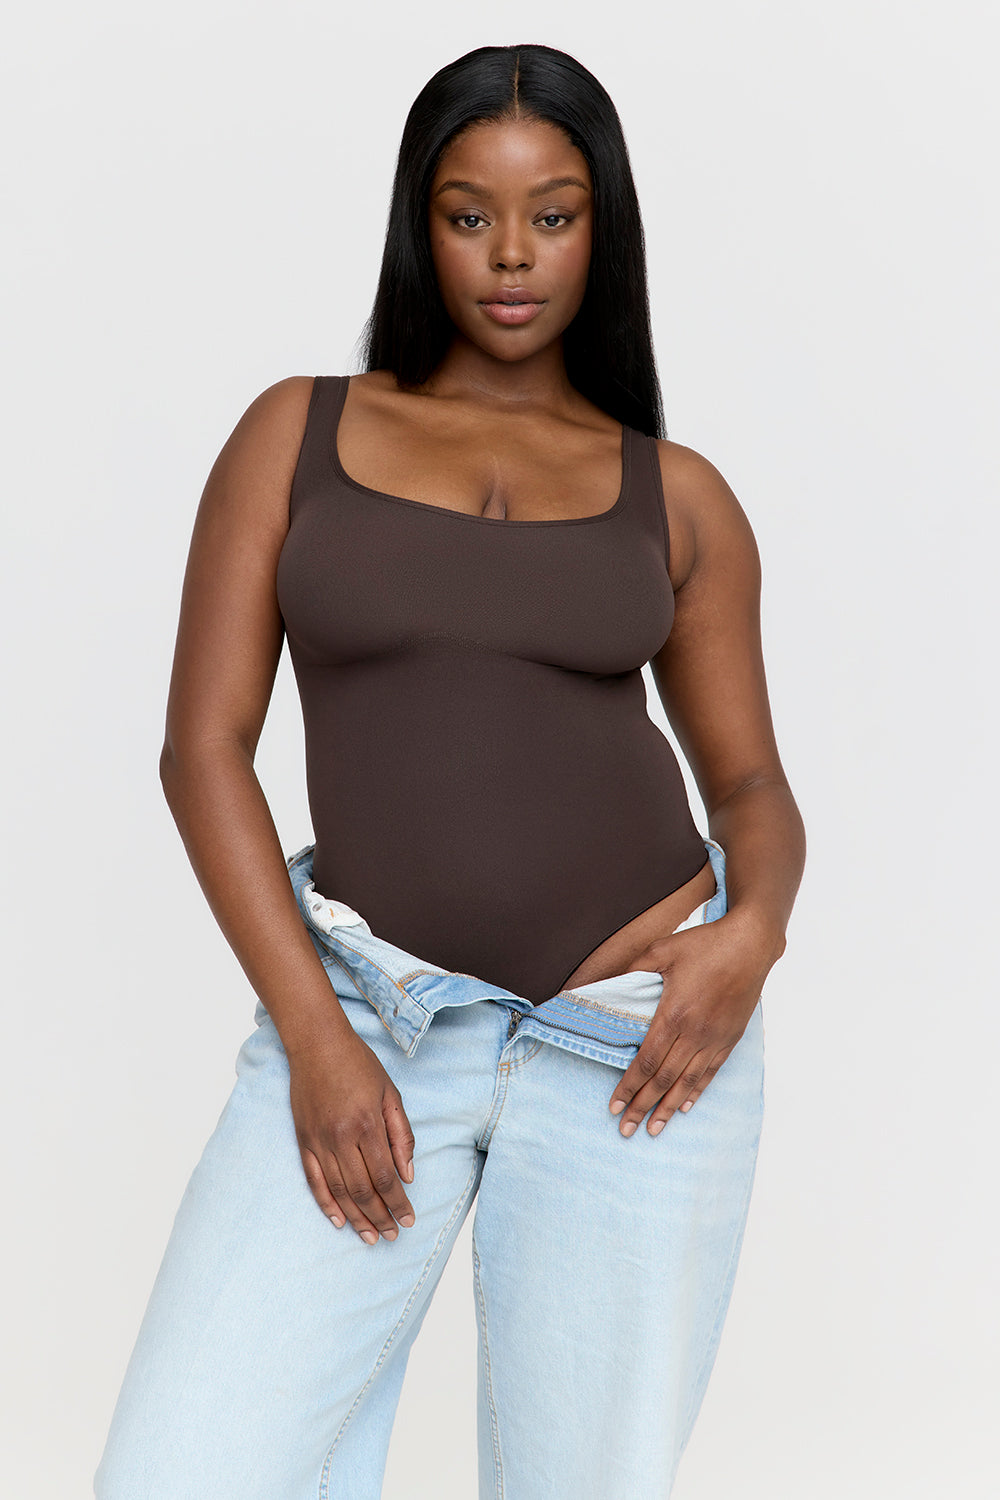 Fashion Staple: Viral Compression Bodysuit + How to Style